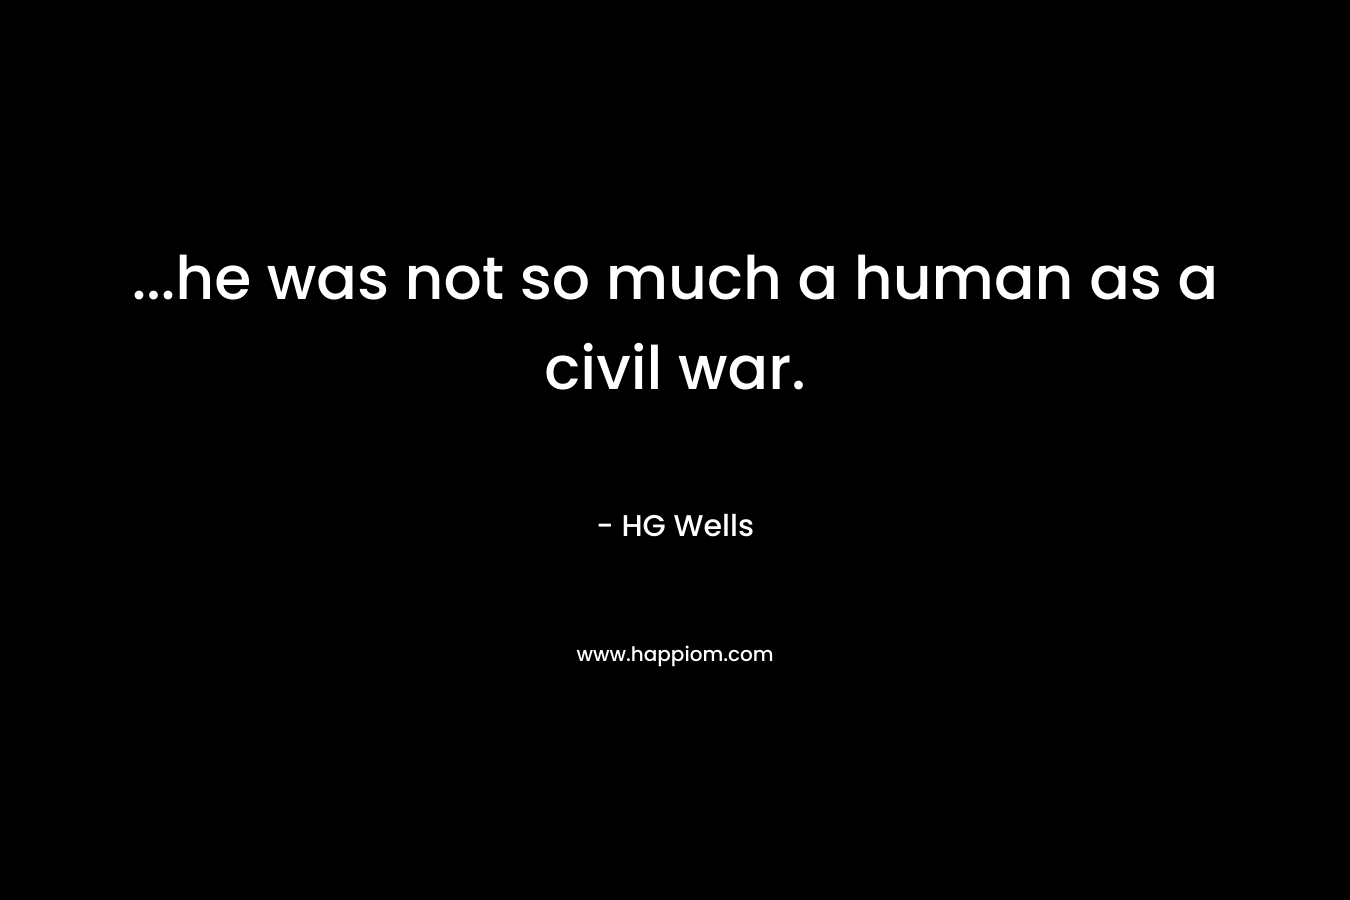 ...he was not so much a human as a civil war.